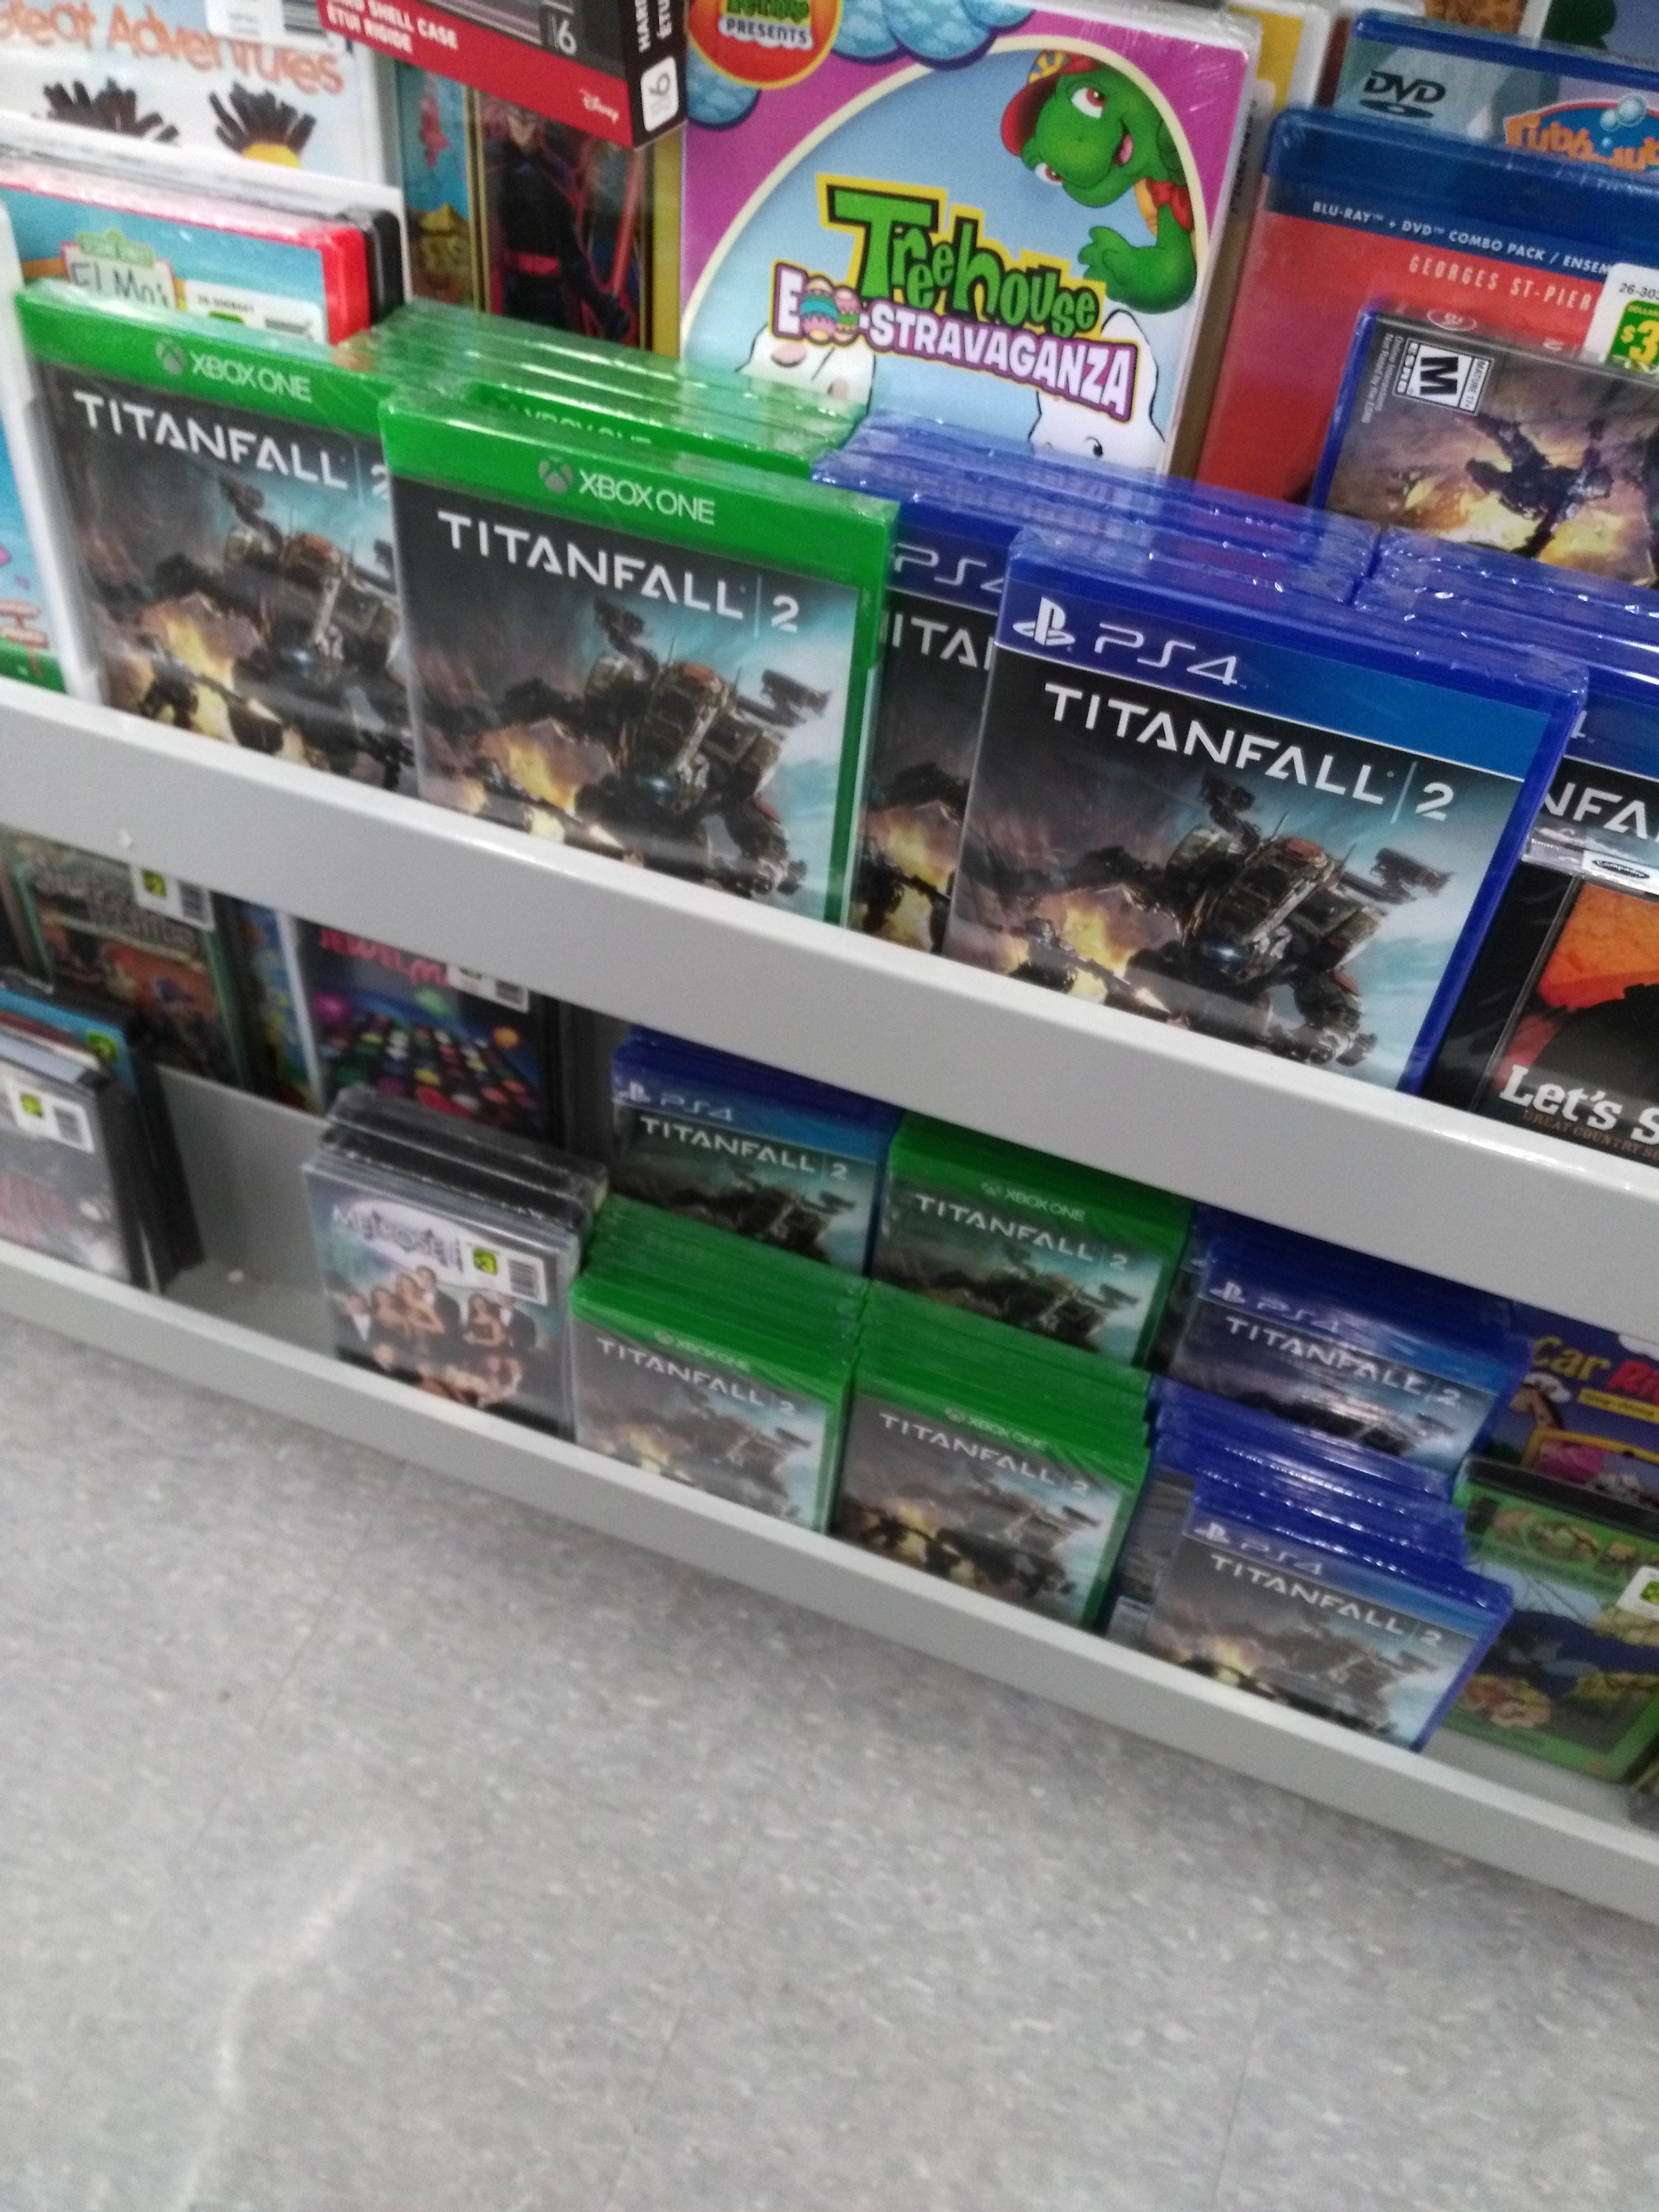 You can buy a physical copy of Titanfall 2 for $4.00 at Dollar store. :  r/gaming